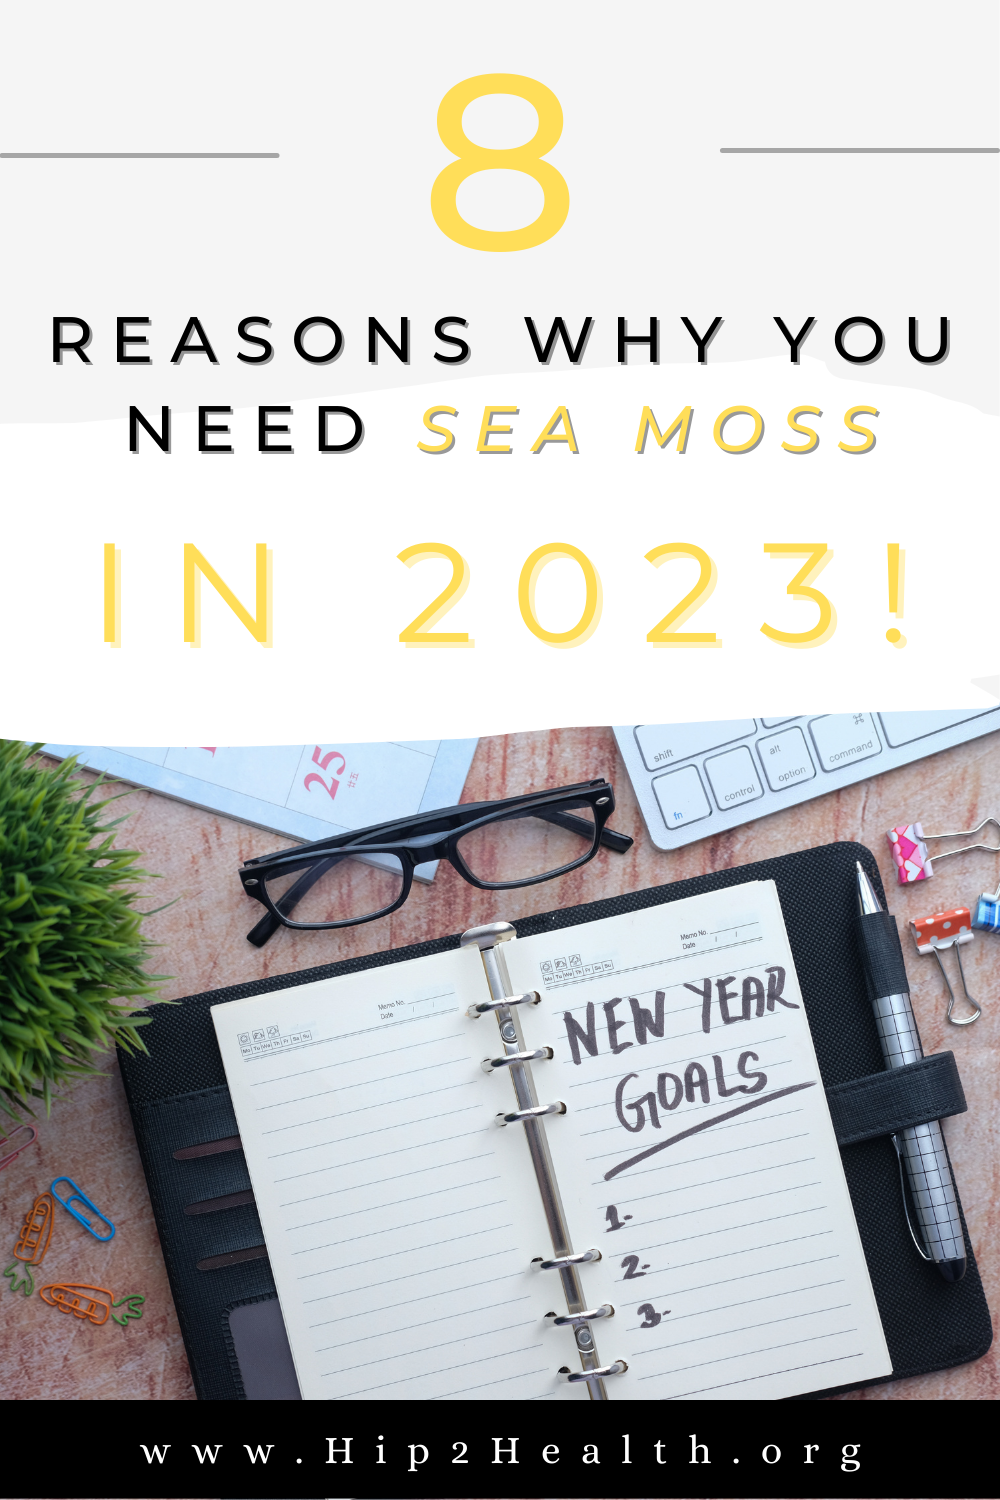 8 Reasons Why You Need Sea Moss In 2023